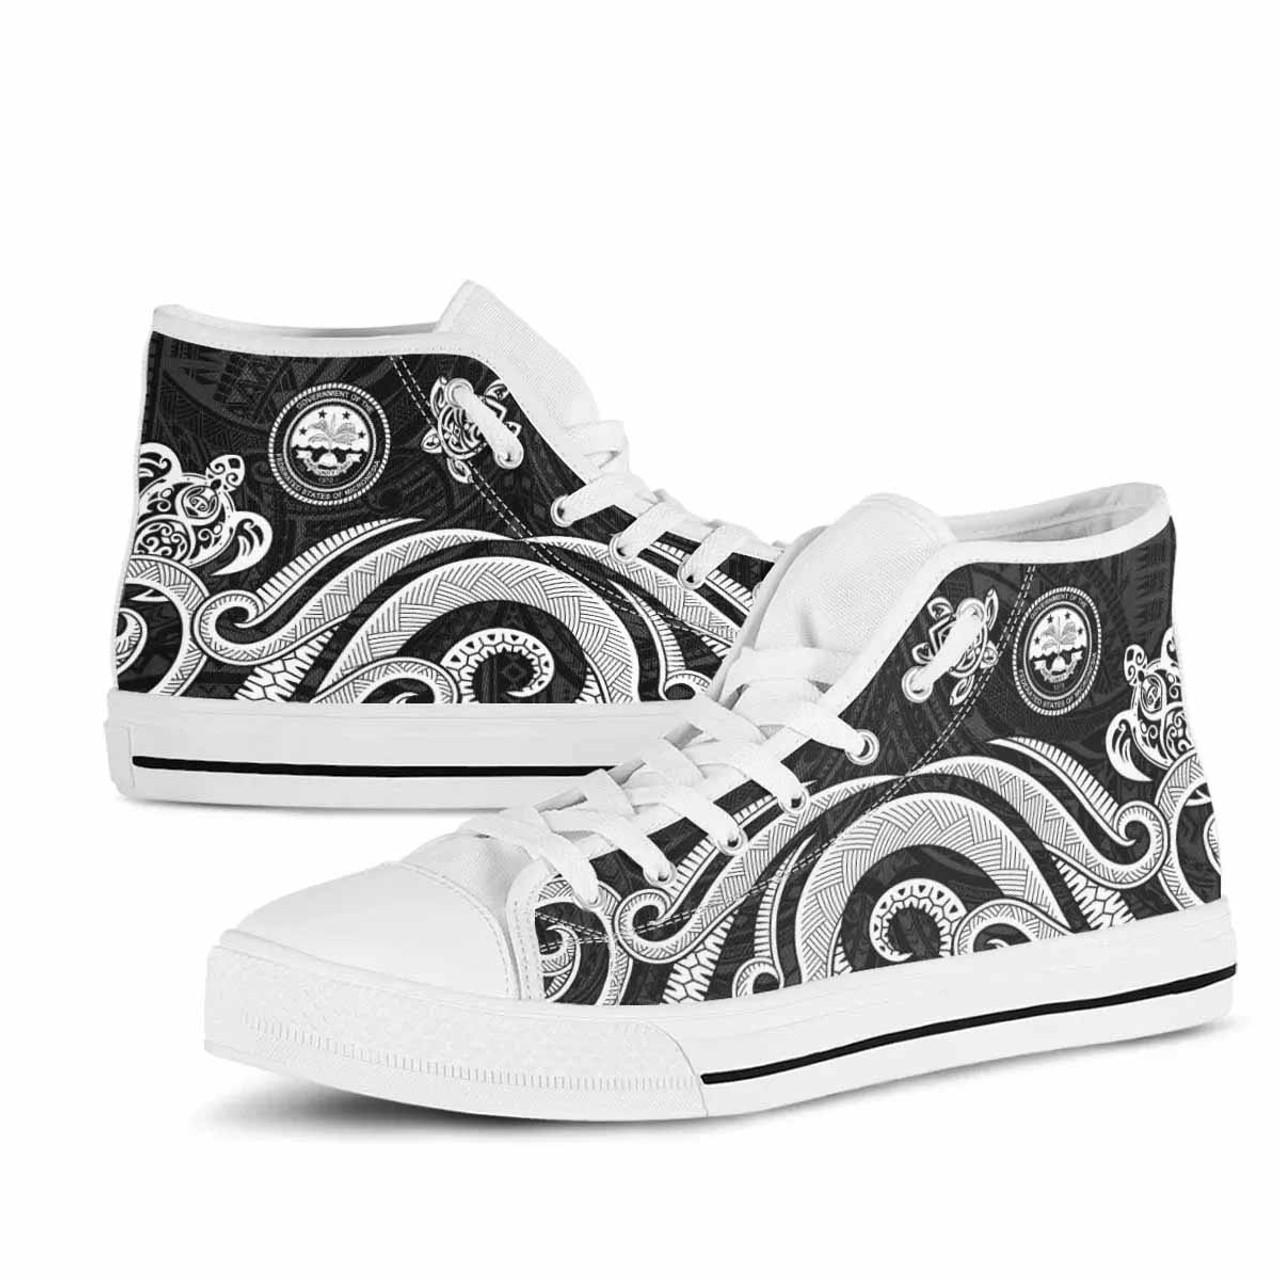 Federated States of Micronesia High Top Shoes - White Tentacle Turtle 10